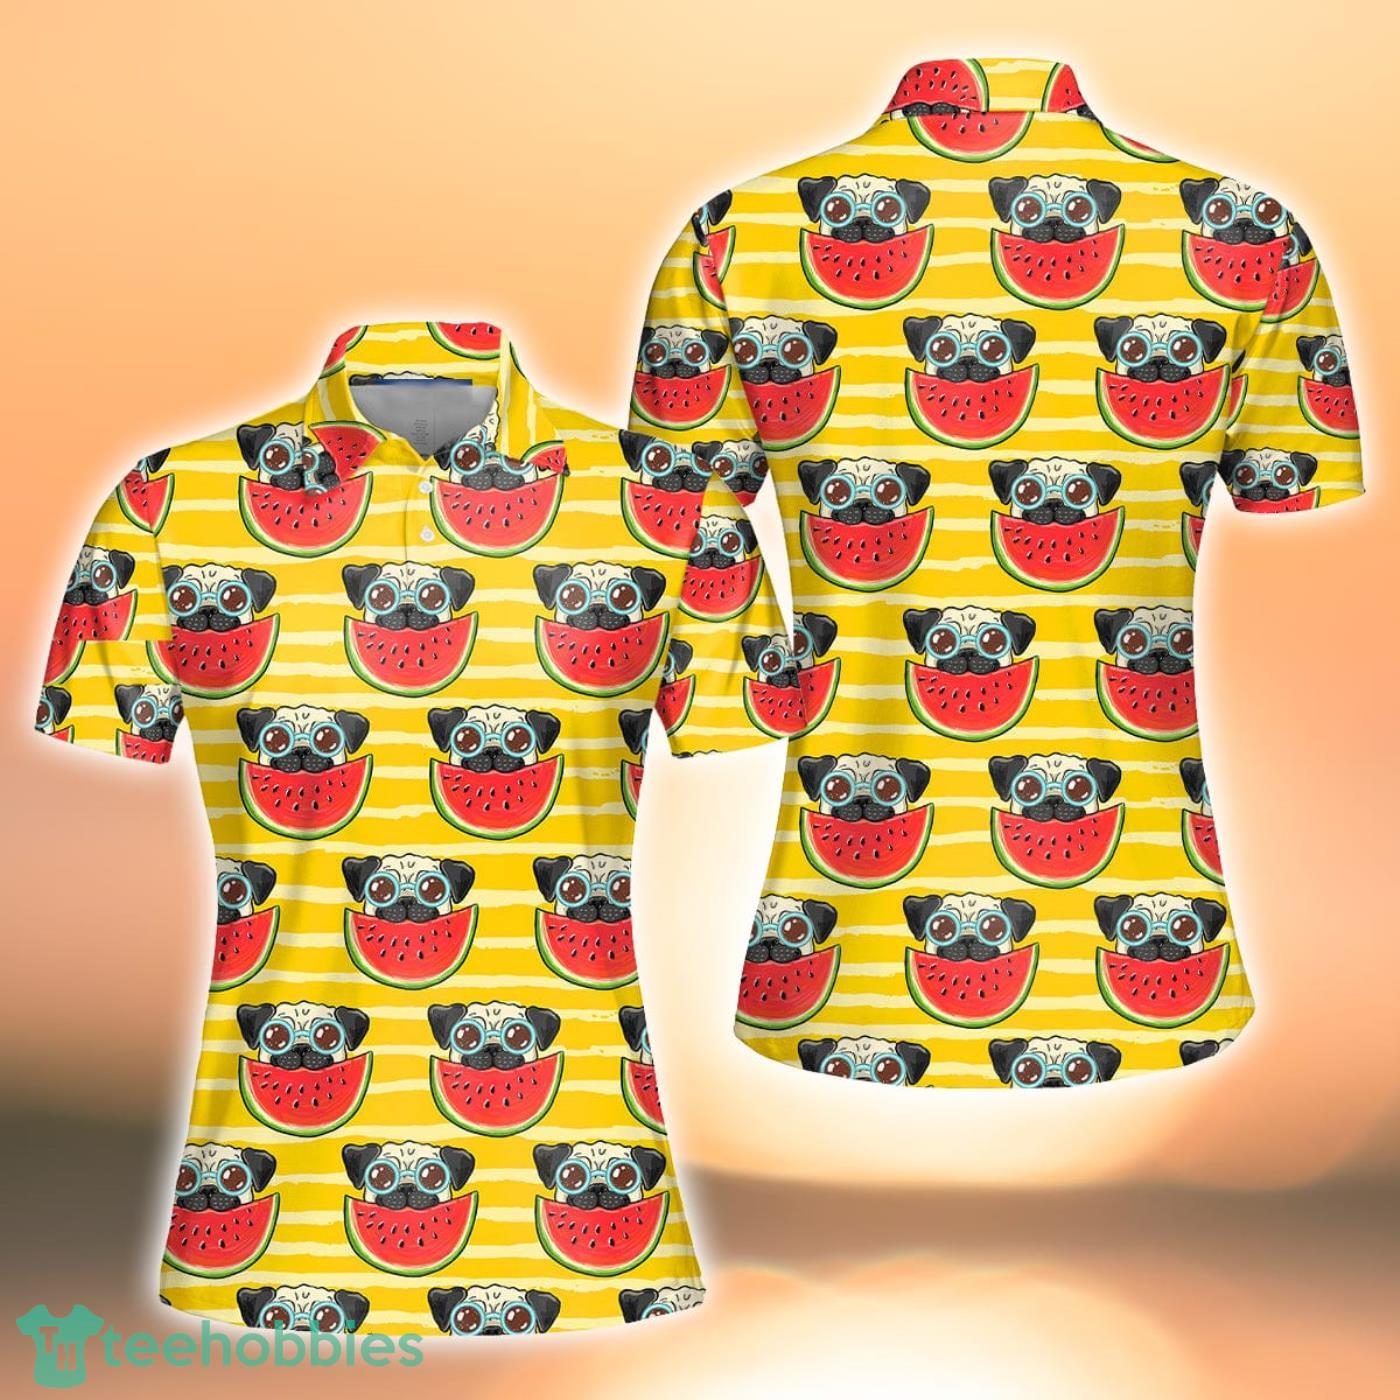 https://image.teehobbies.us/2023/07/funny-pug-in-sunglasses-eating-watermelon-sport-gift-polo-shirt-for-men-and-women.jpg